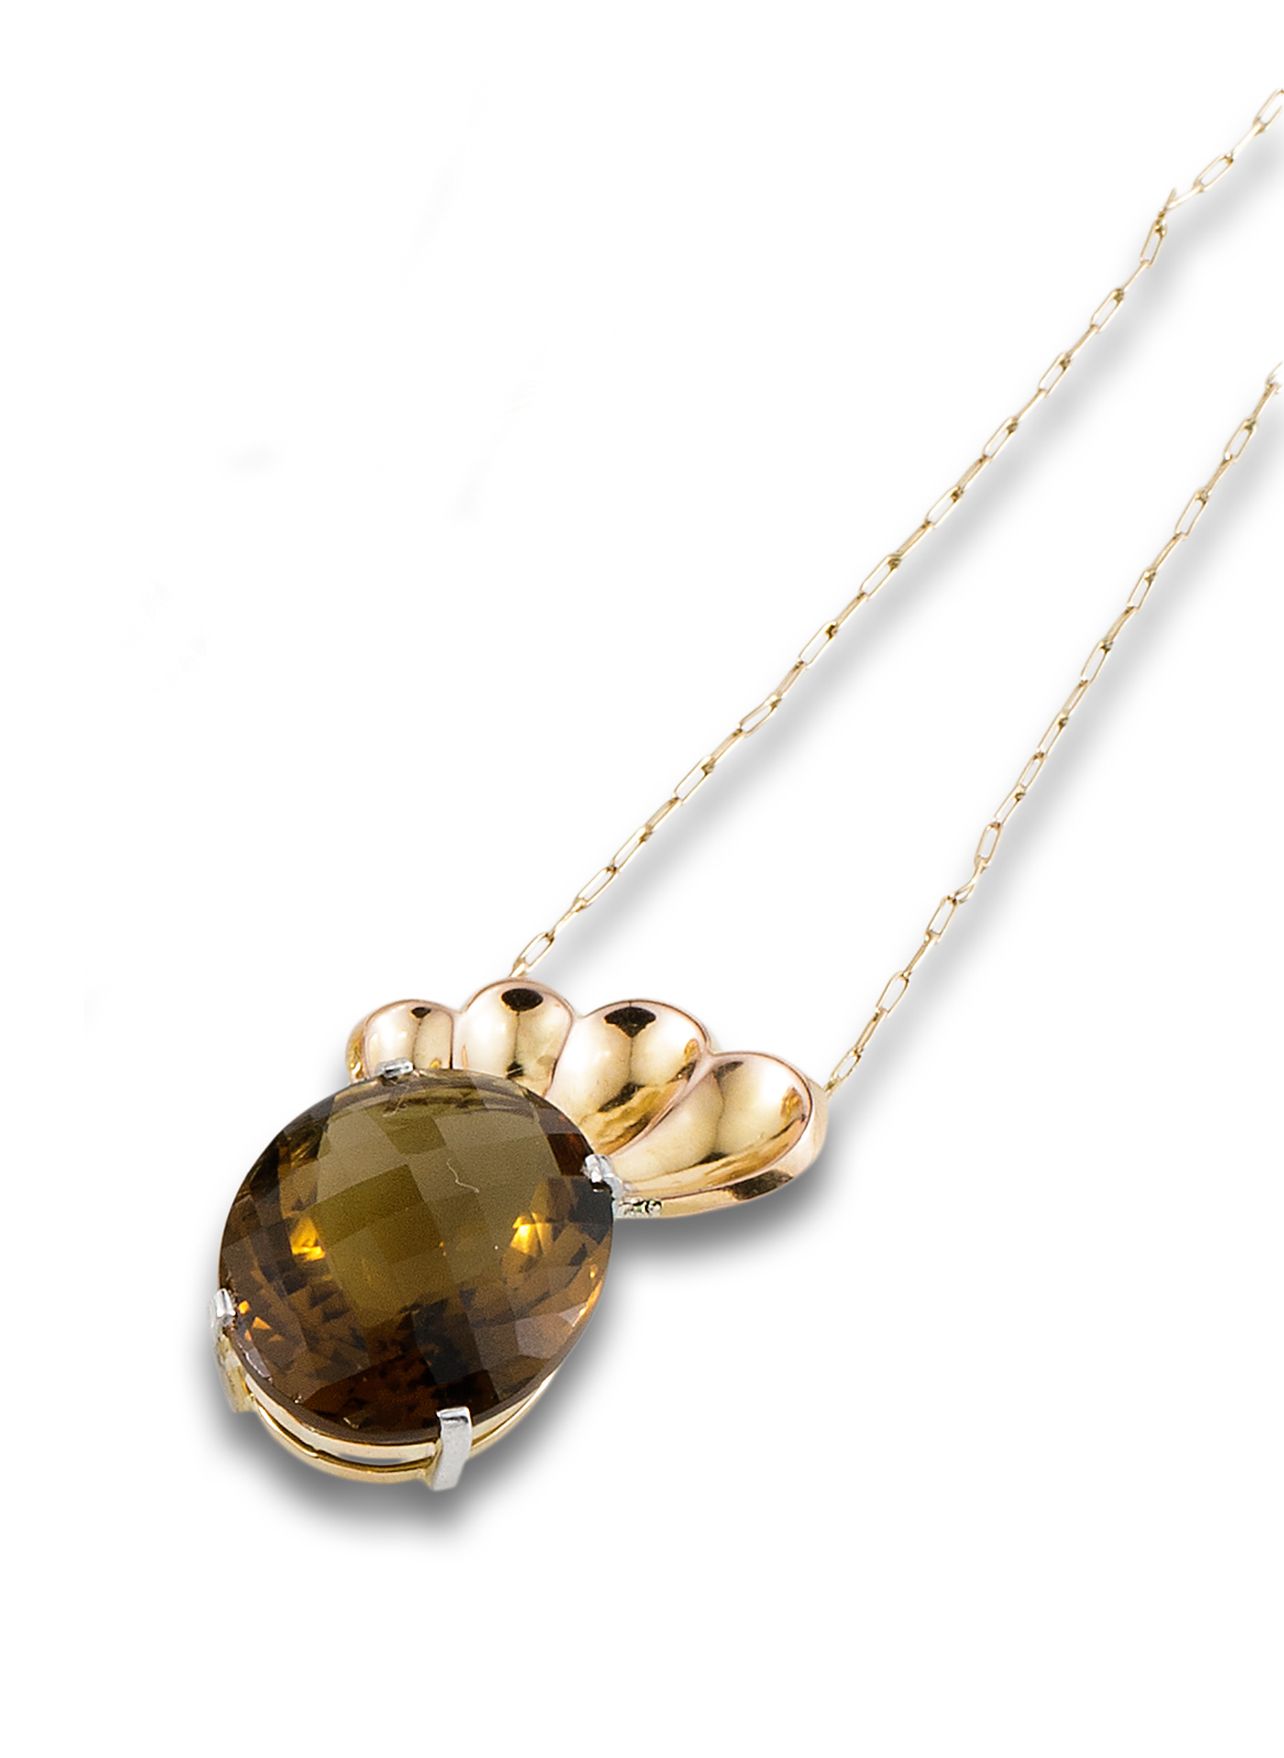 18 kt yellow gold chain and pendant. Formed by a smoky quartz faceted cabochon c&hellip;